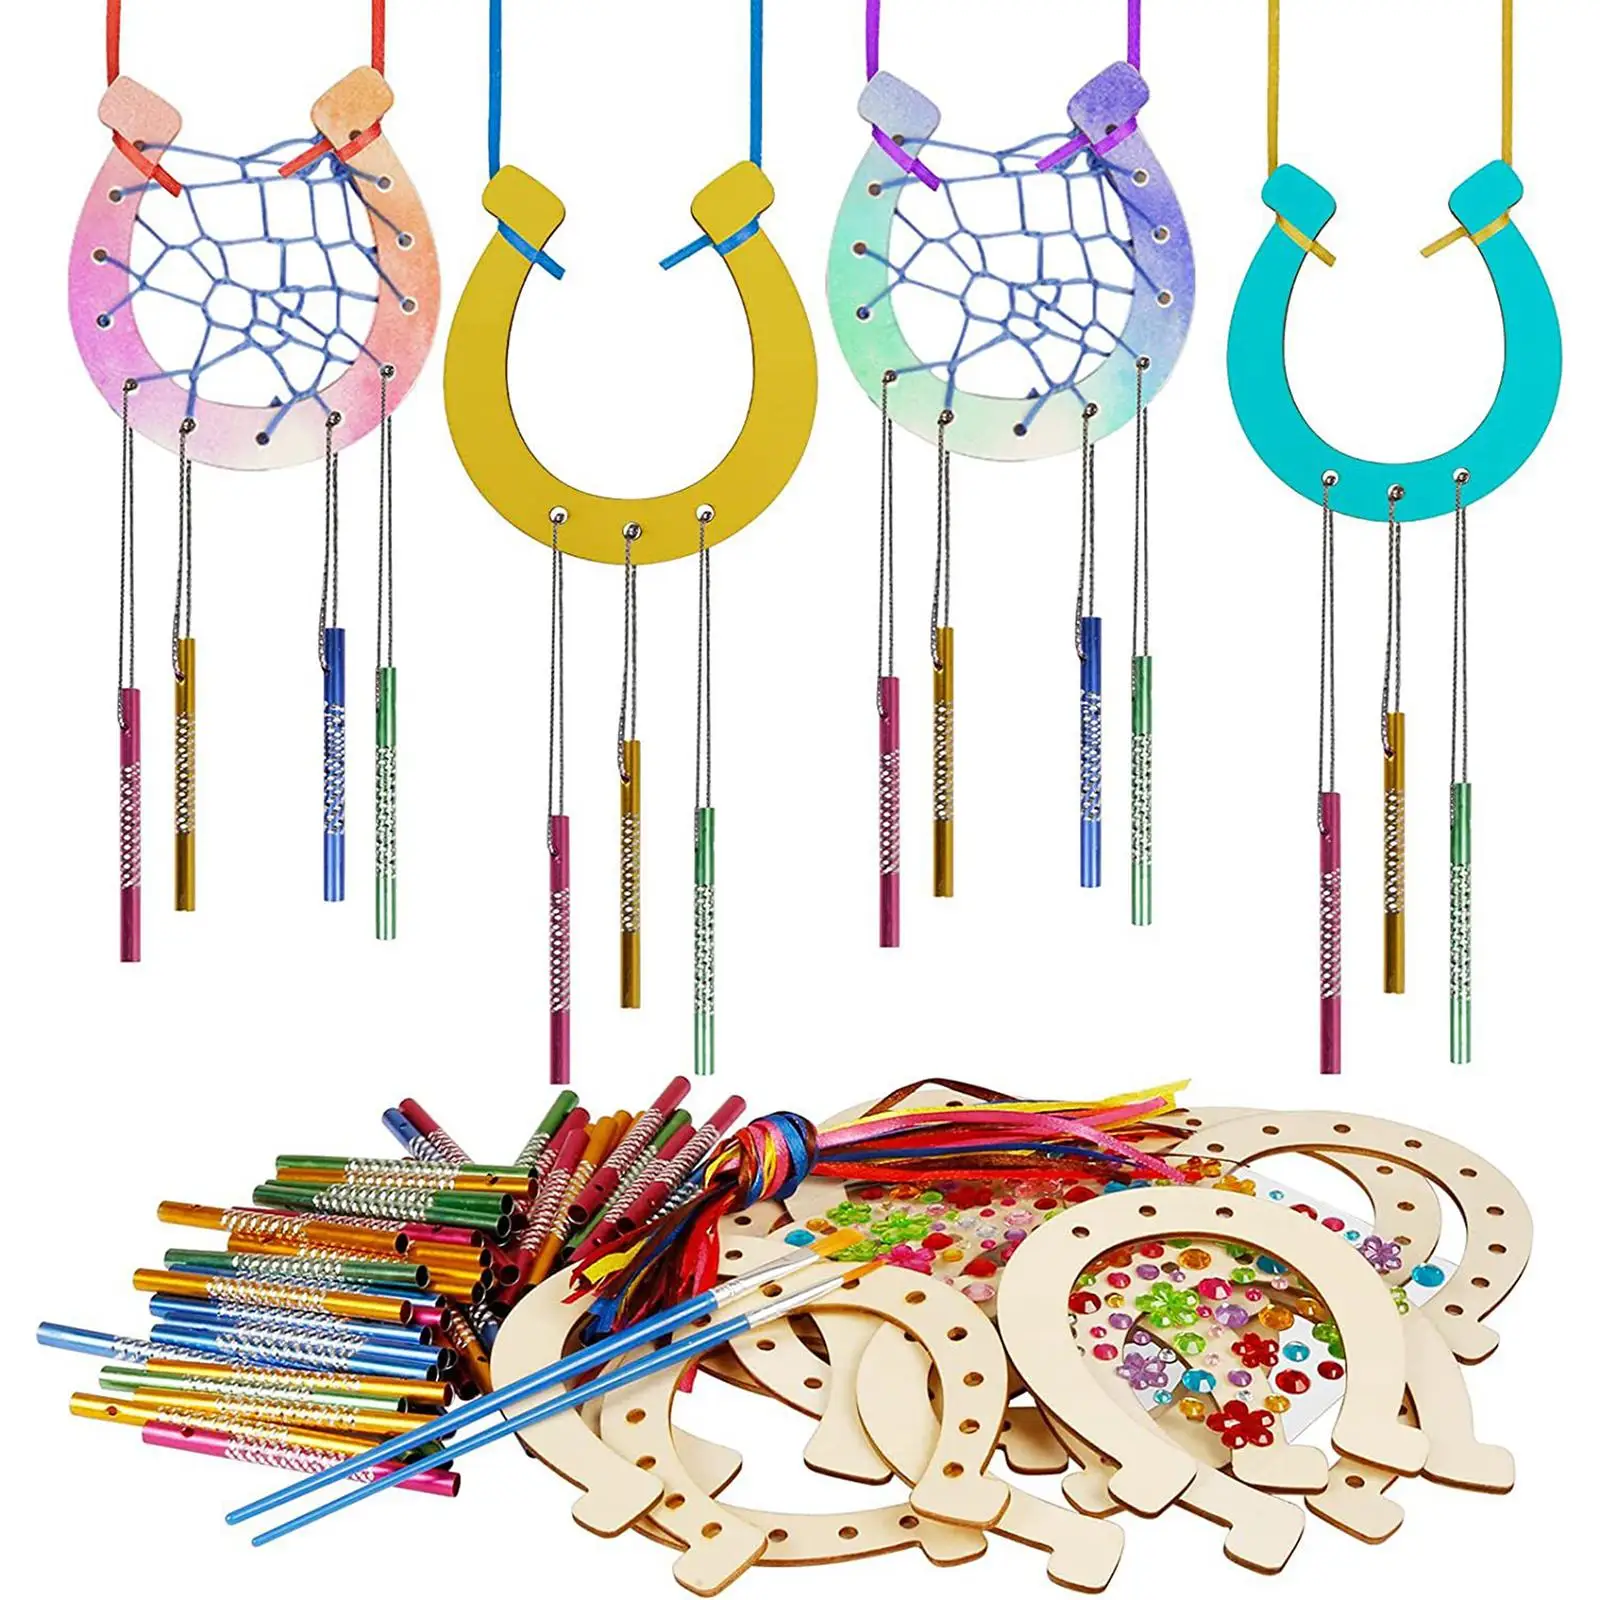 DIY Wood Wind Chimes Set with Brush DIY Coloring Unfinished Wooden Slices for Window Indoor Outdoor Wall Decor Children Gifts